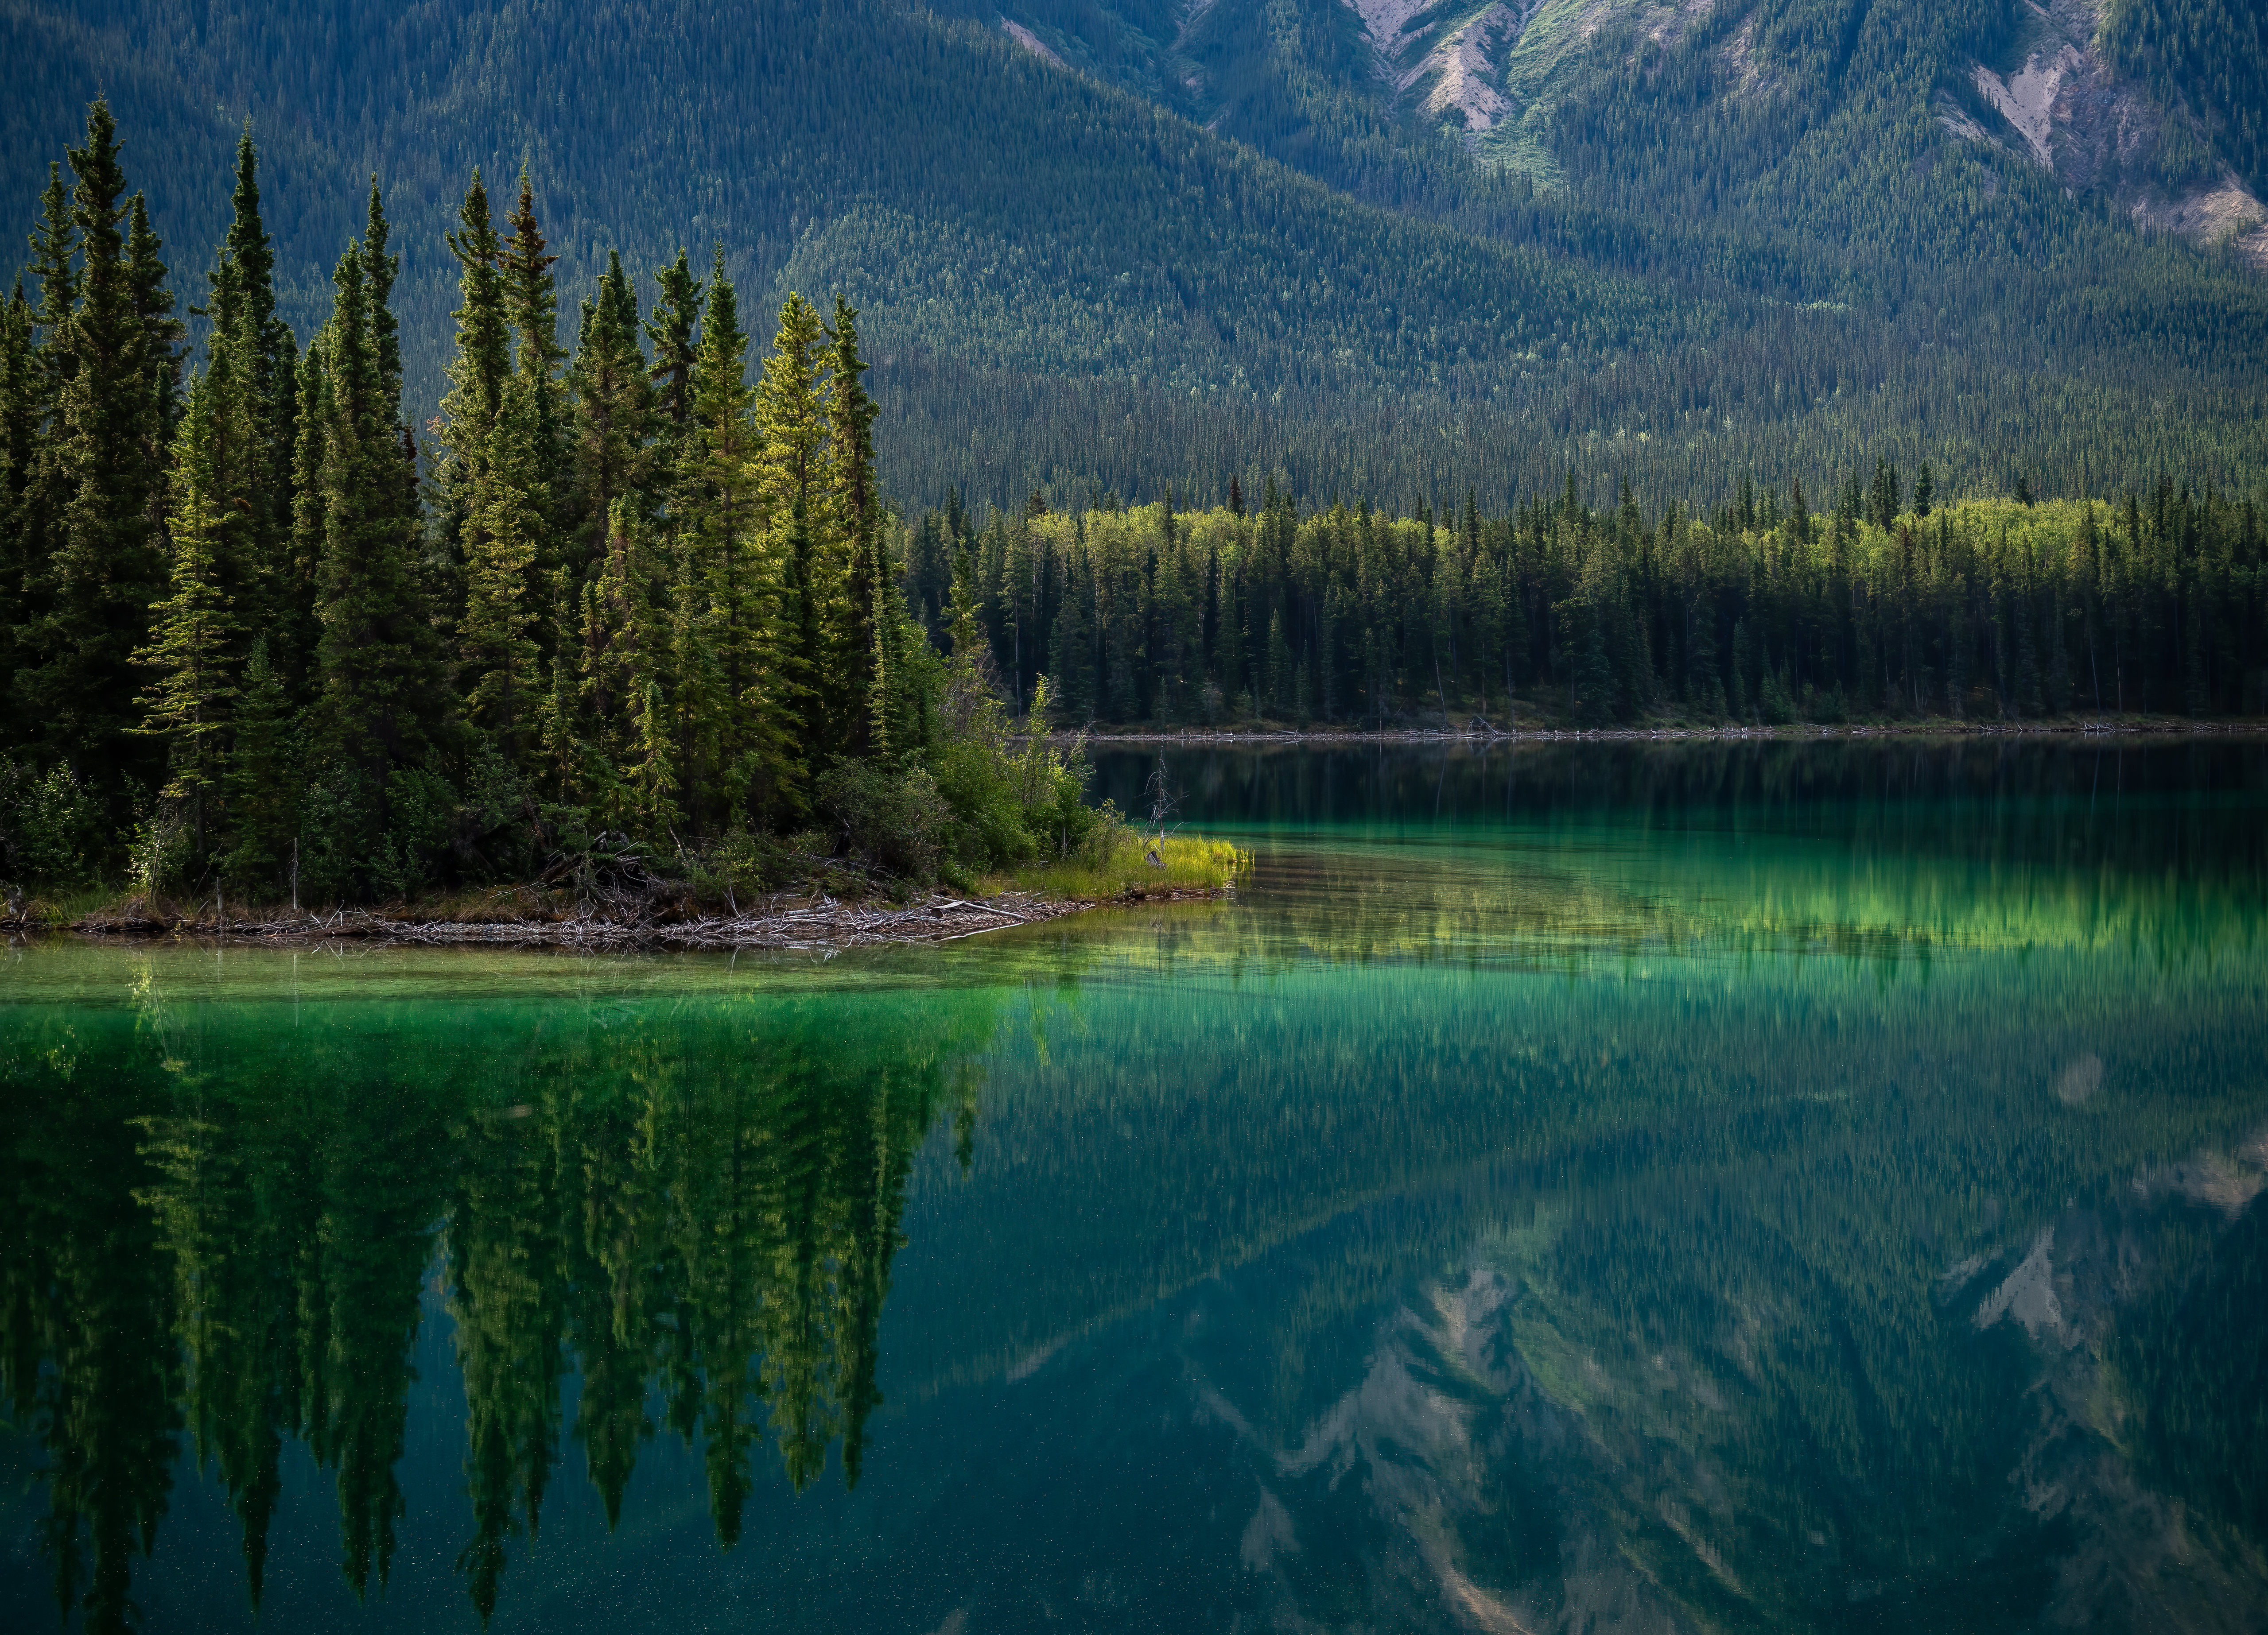 Nature Landscape Trees Water Reflection Forest Mountains Pine Trees Jasper National Park Canada 5120x3692